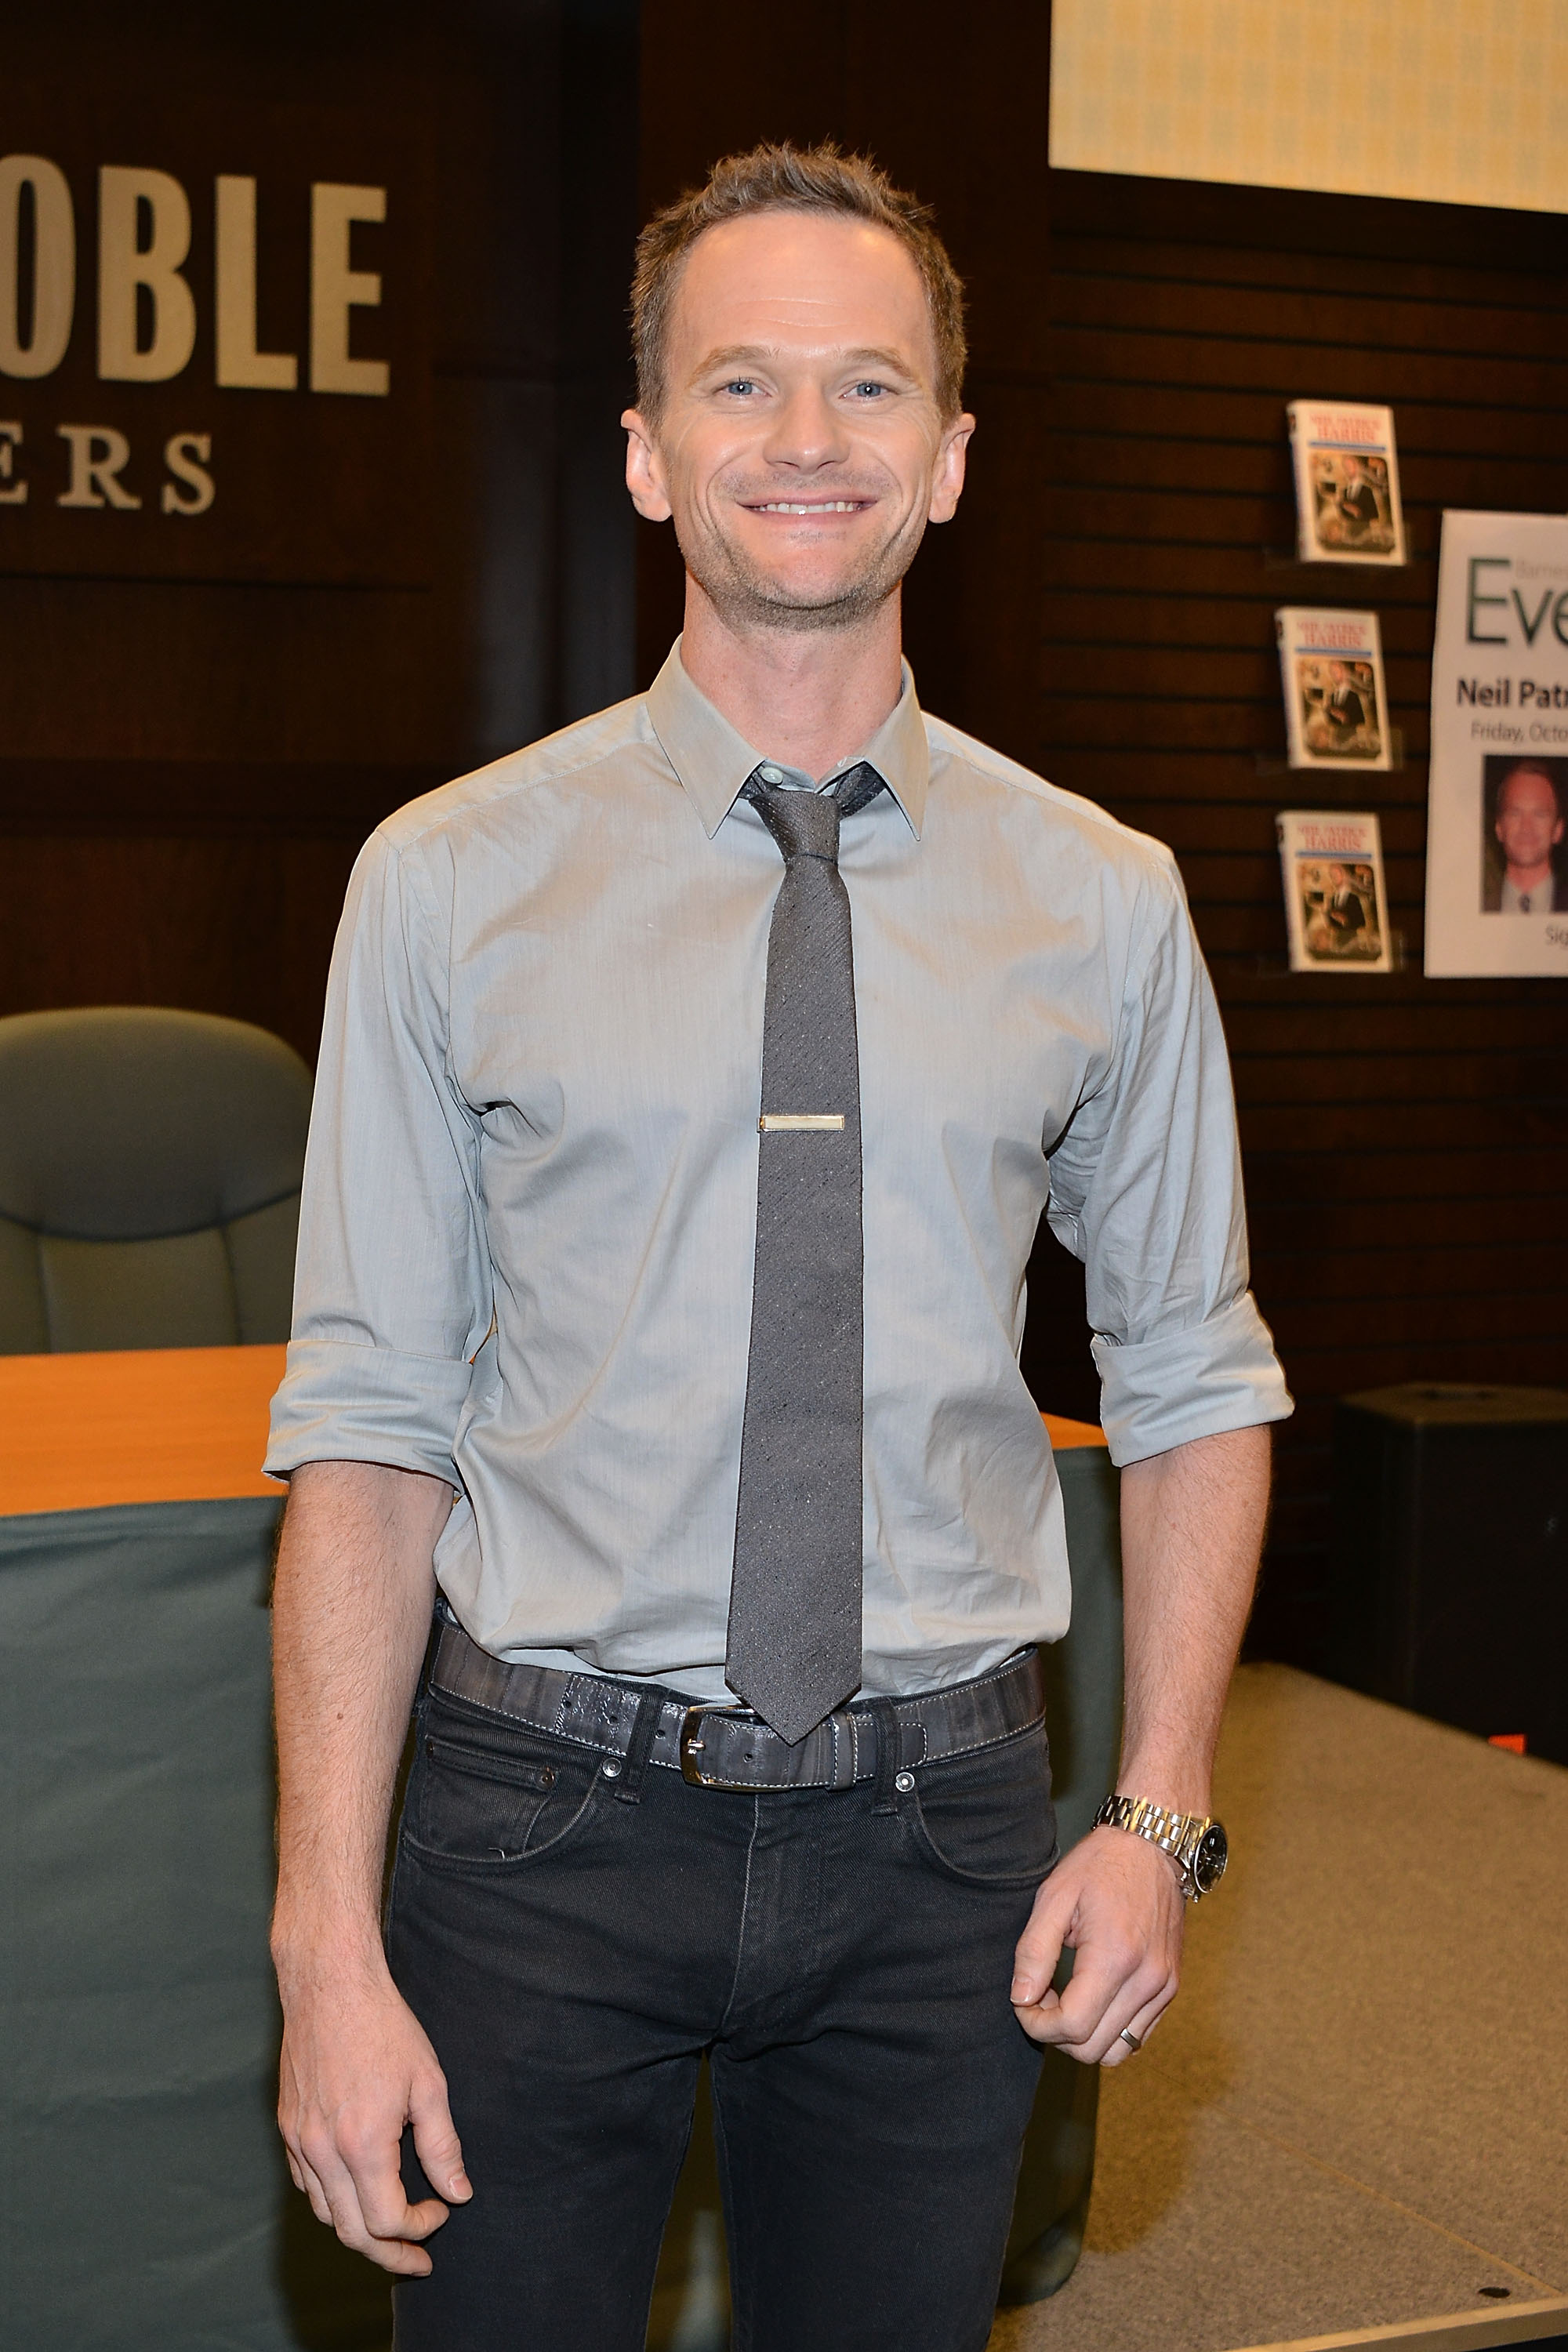 Neil Patrick Harris Signs And Discusses His New Memoir "Neil Patrick Harris: Choose Your Own Autobiography"